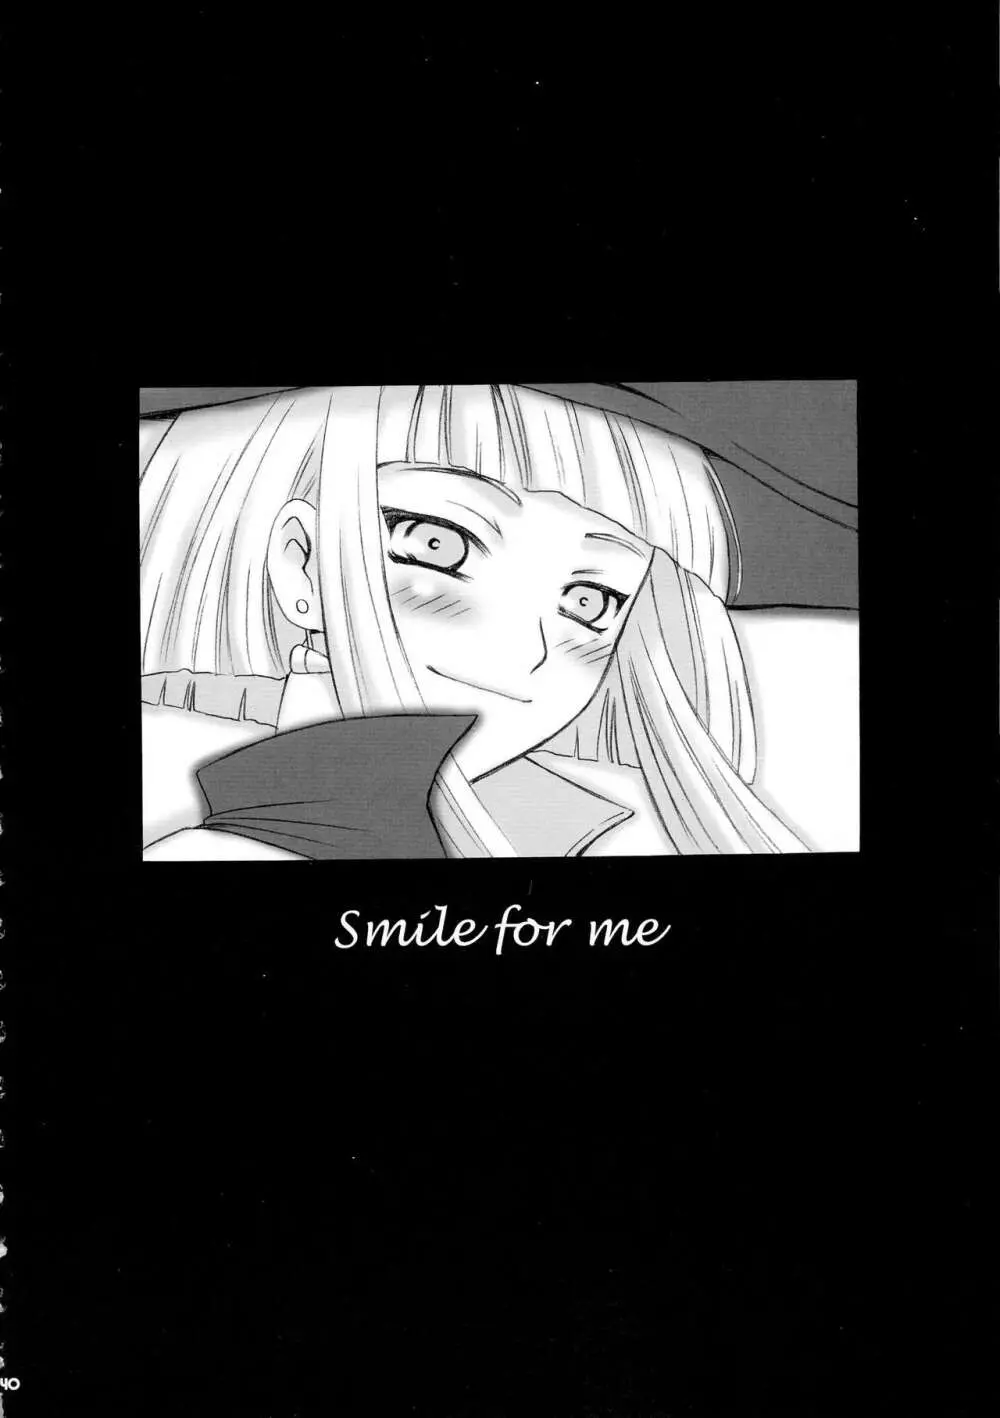 SMILE FOR ME 40ページ